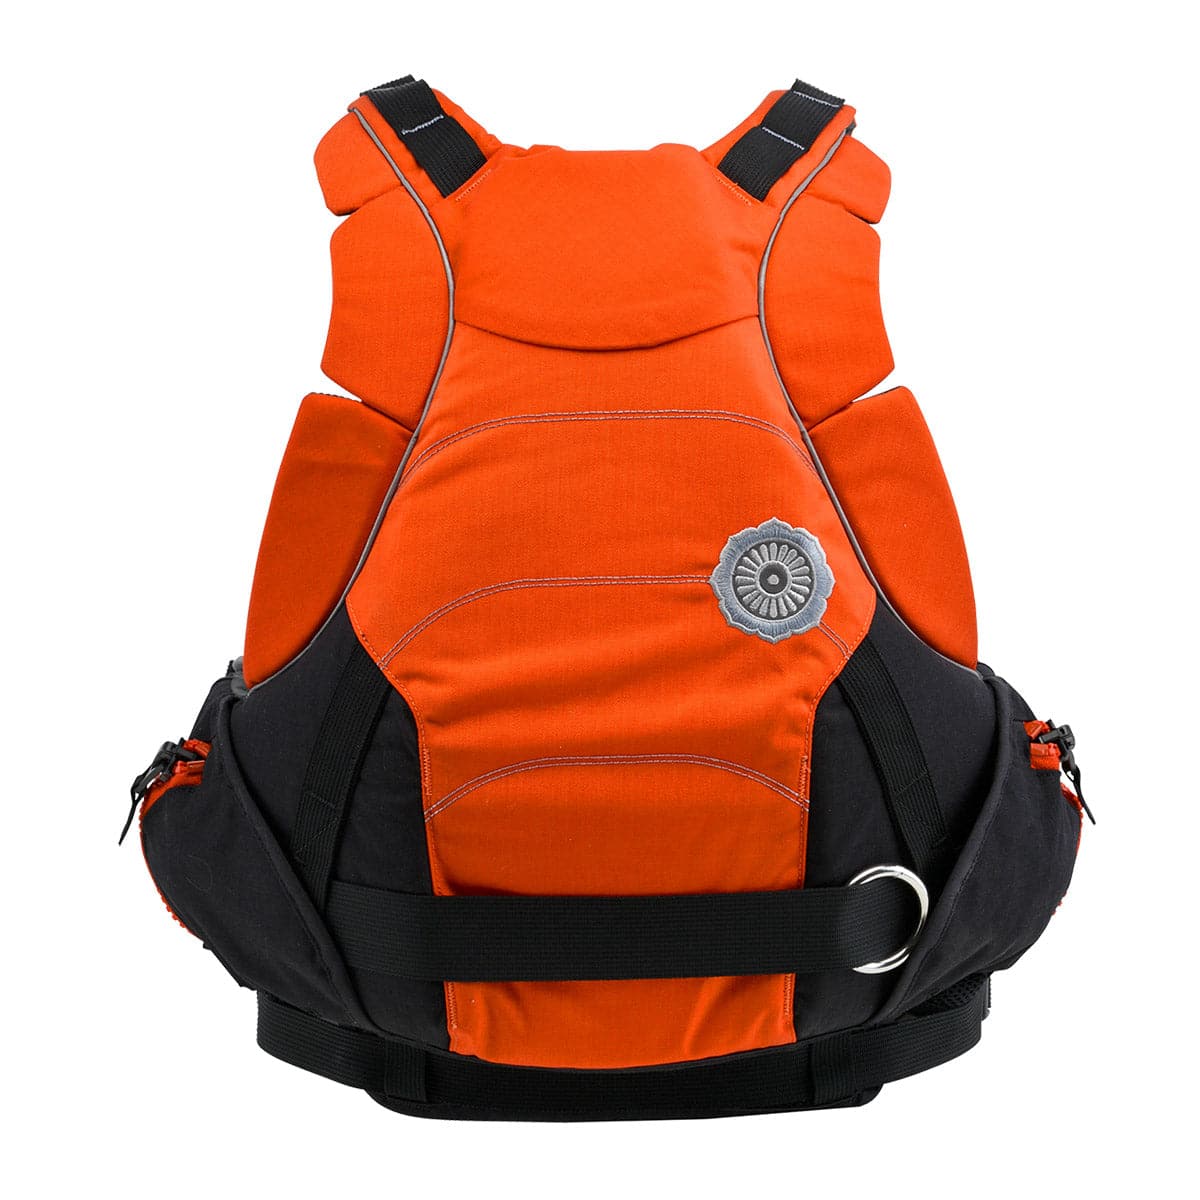 Featuring the Greenjacket Rescue PFD rescue pfd manufactured by Astral shown here from a seventh angle.